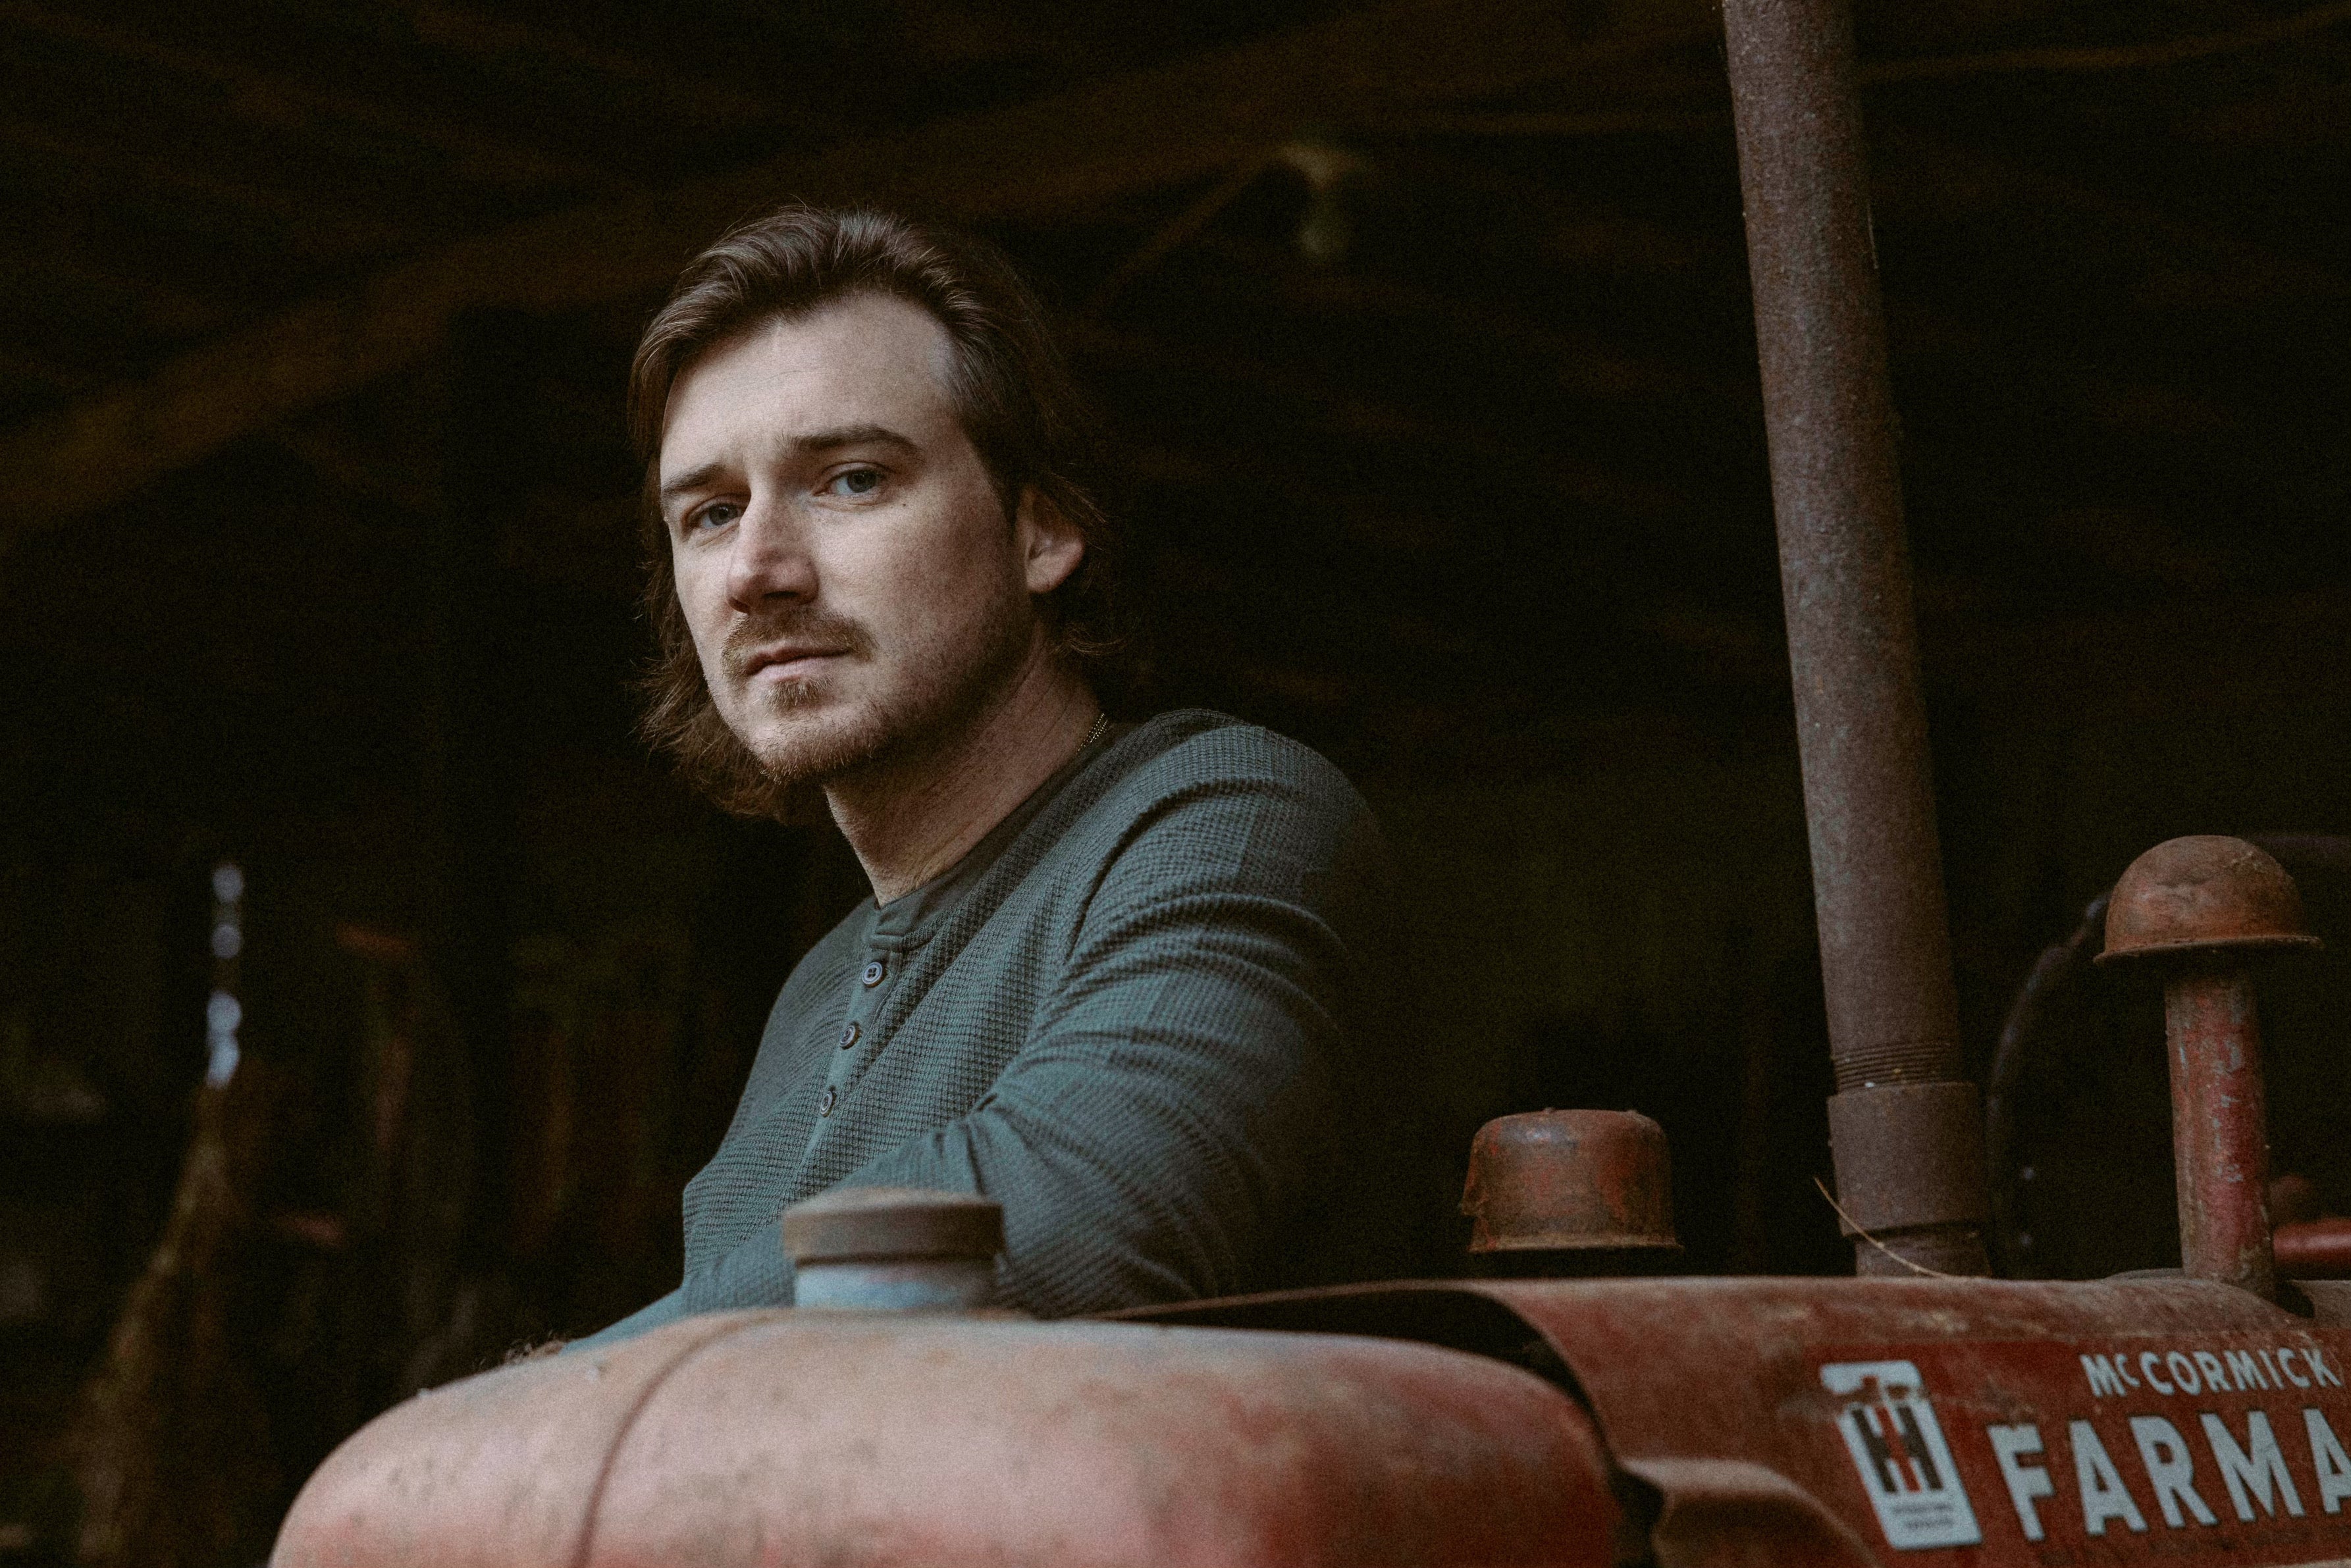 Morgan Wallen - One Night At a Time Tour in London promo photo for Live Nation presale offer code